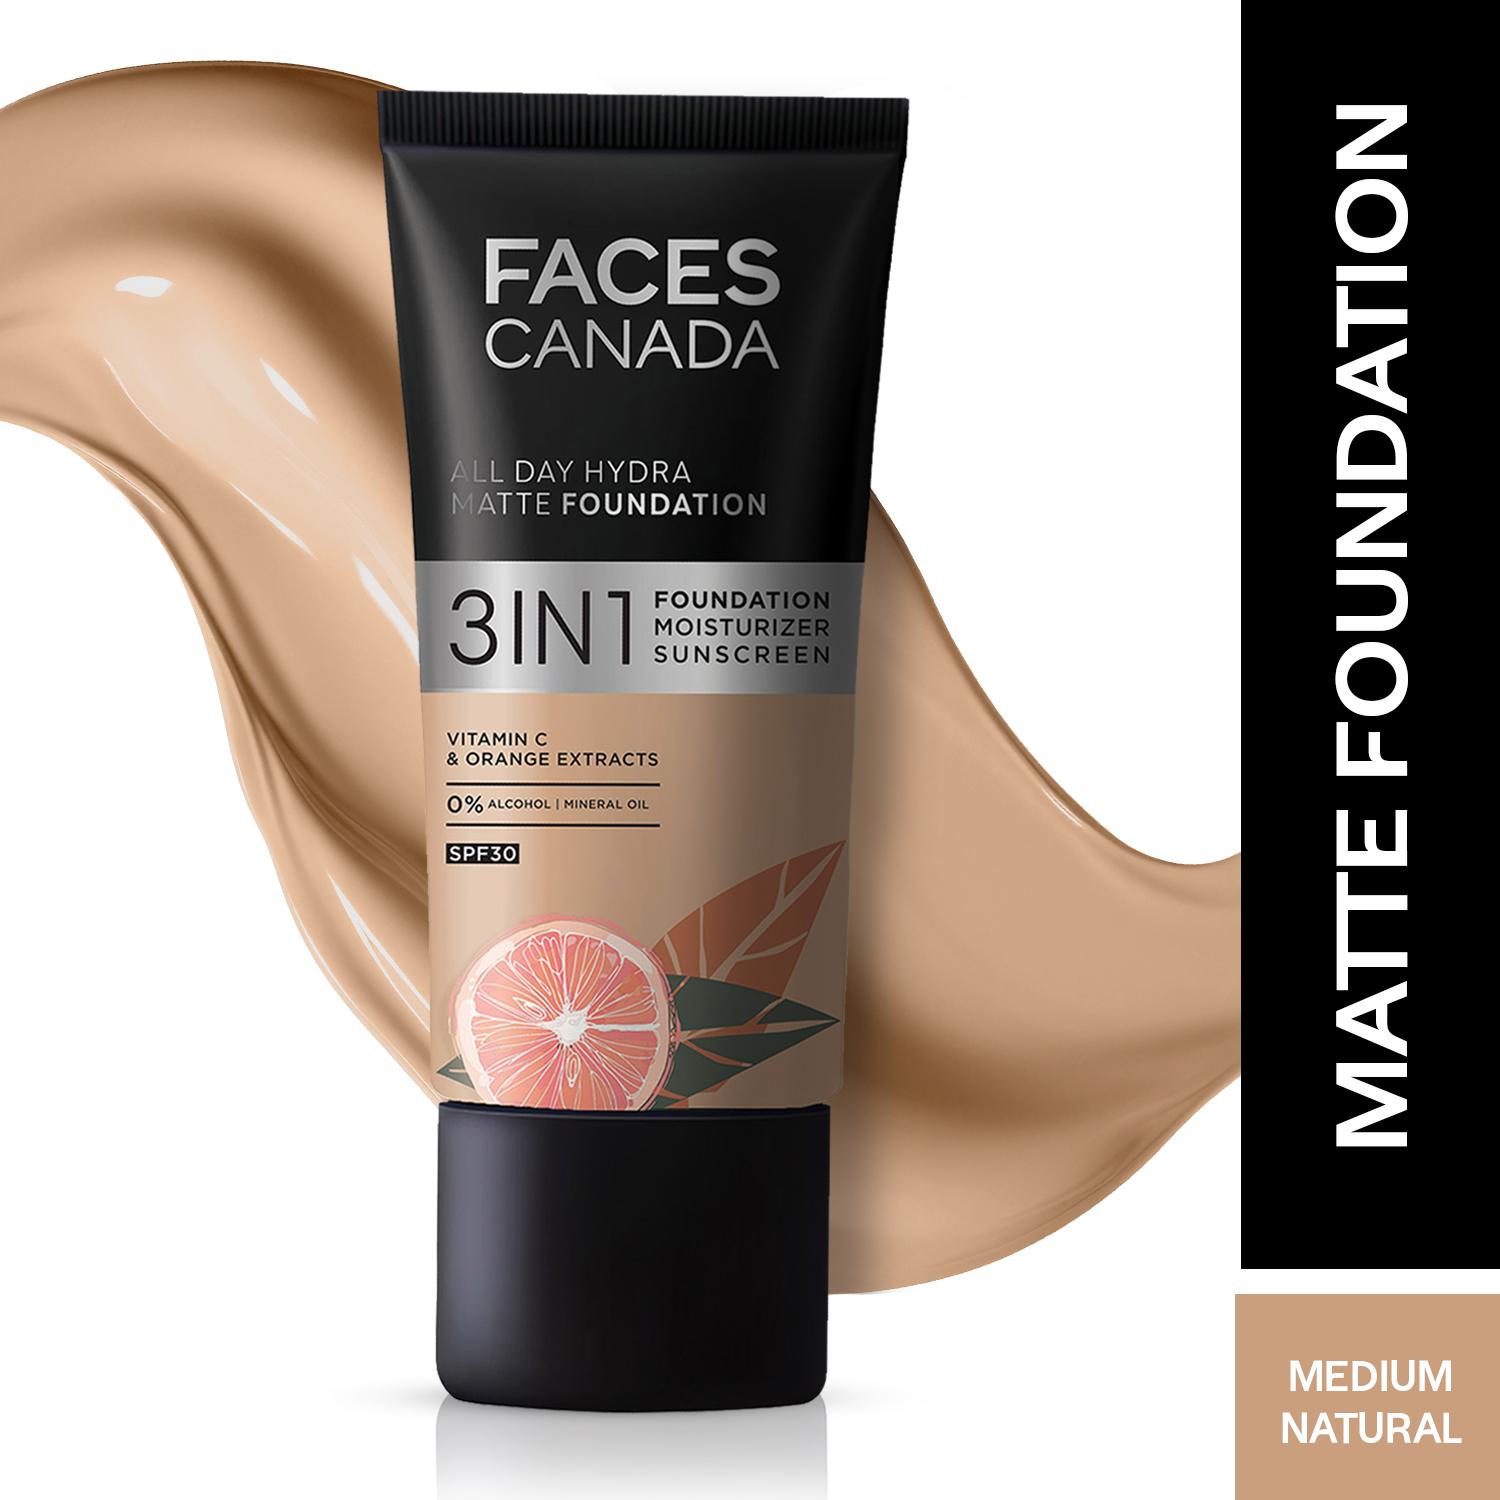 Faces Canada | Faces Canada 3in1 All Day Hydra Matte Foundation + Moisturizer + SPF 30 - Medium Natural 022 (25 ml)